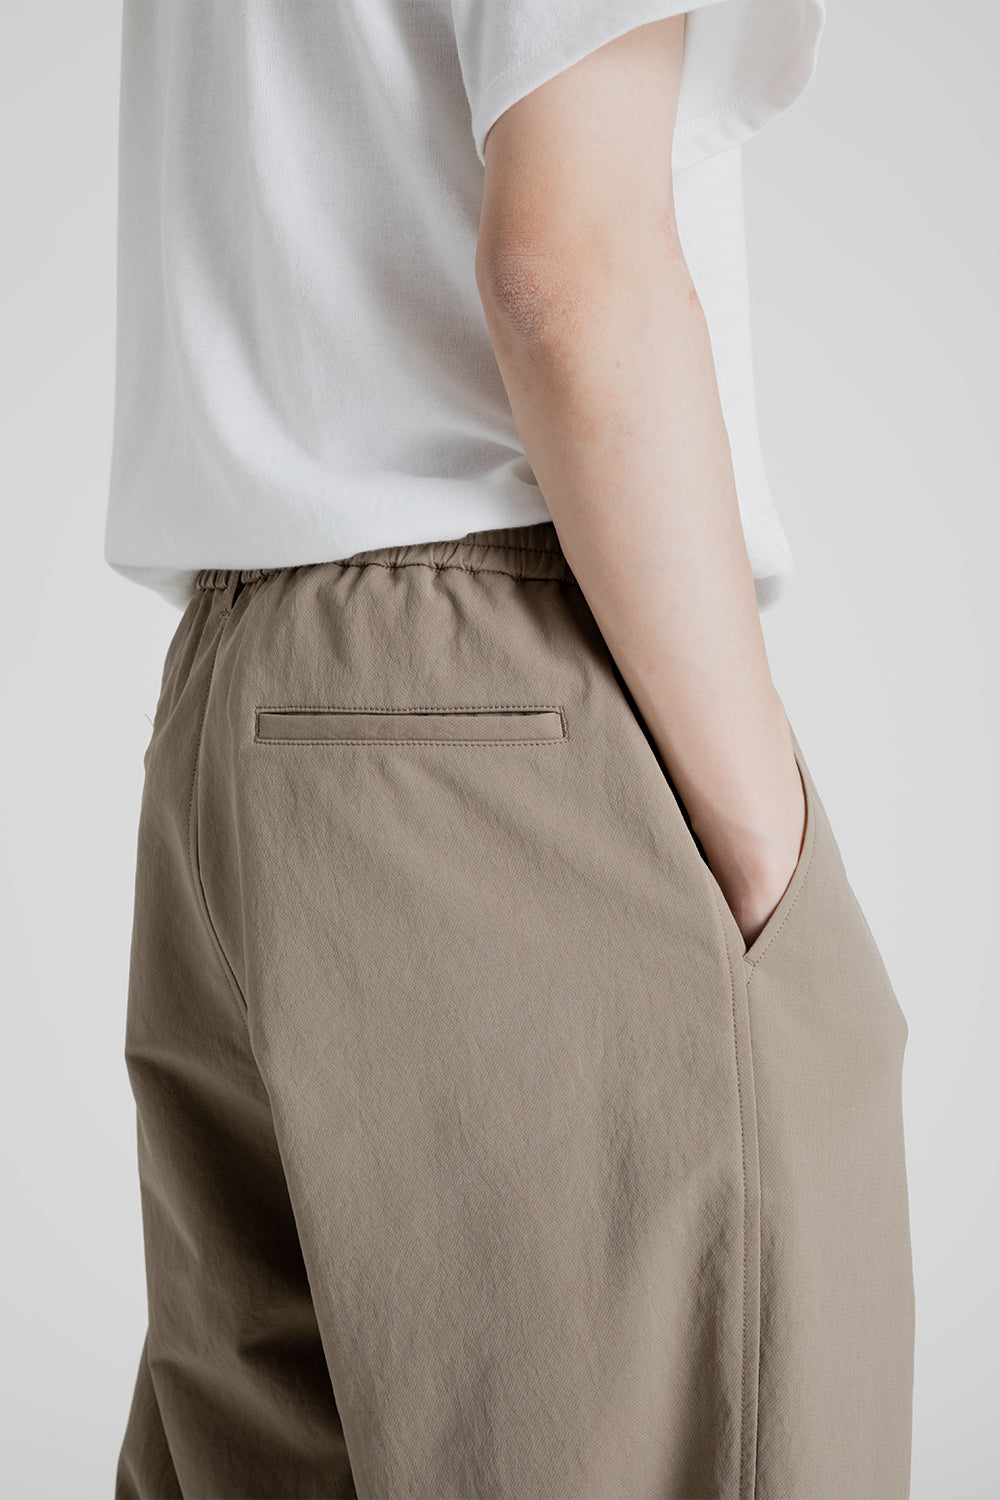 Nanamica Alphadry Wide Easy Pants in Taupe | Wallace Mercantile Shop